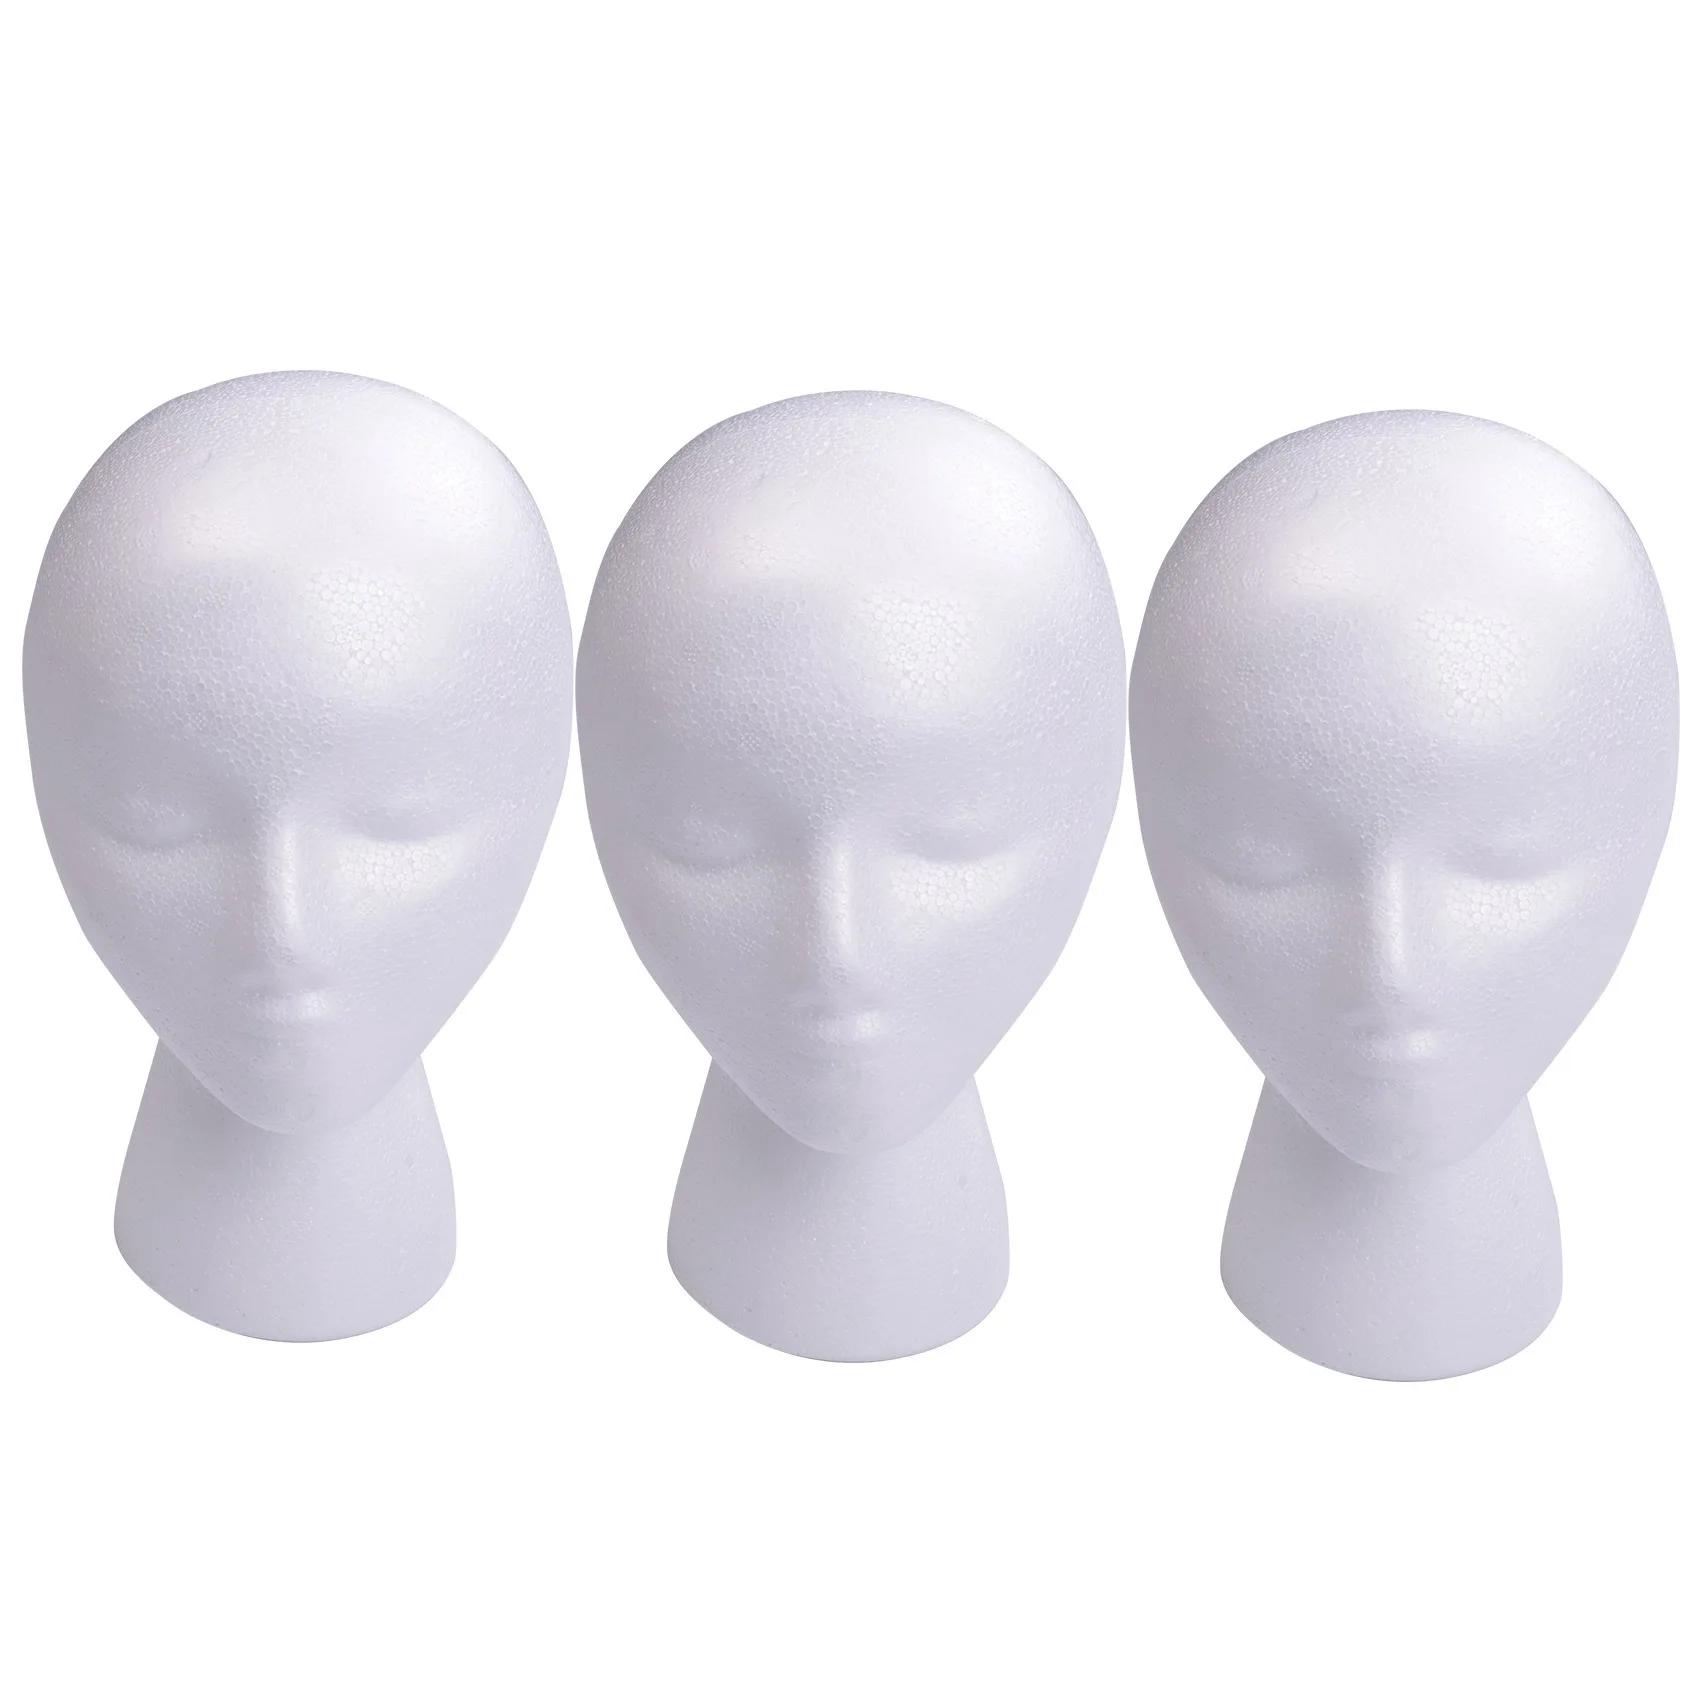 

Wig Head - Tall Female Foam Mannequin Wig Stand and Holder for Style, Model and Display Hair, Hats